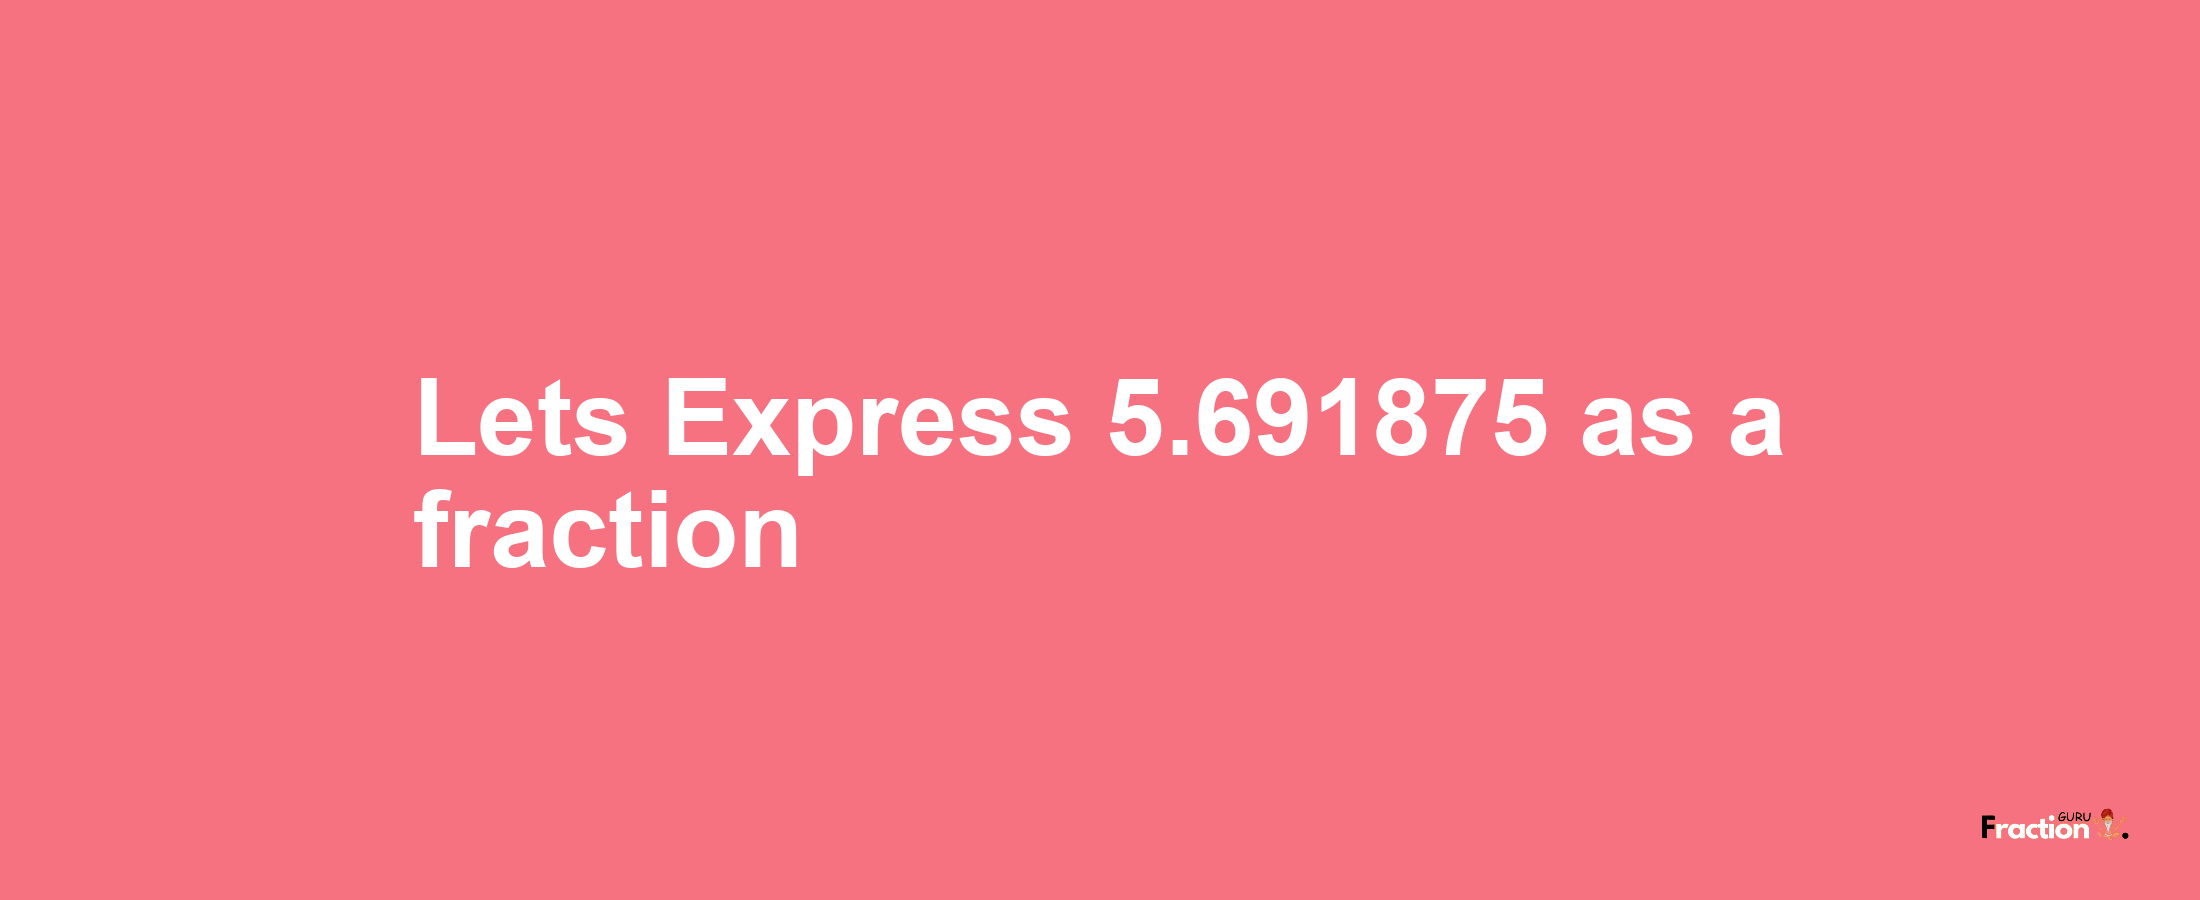 Lets Express 5.691875 as afraction